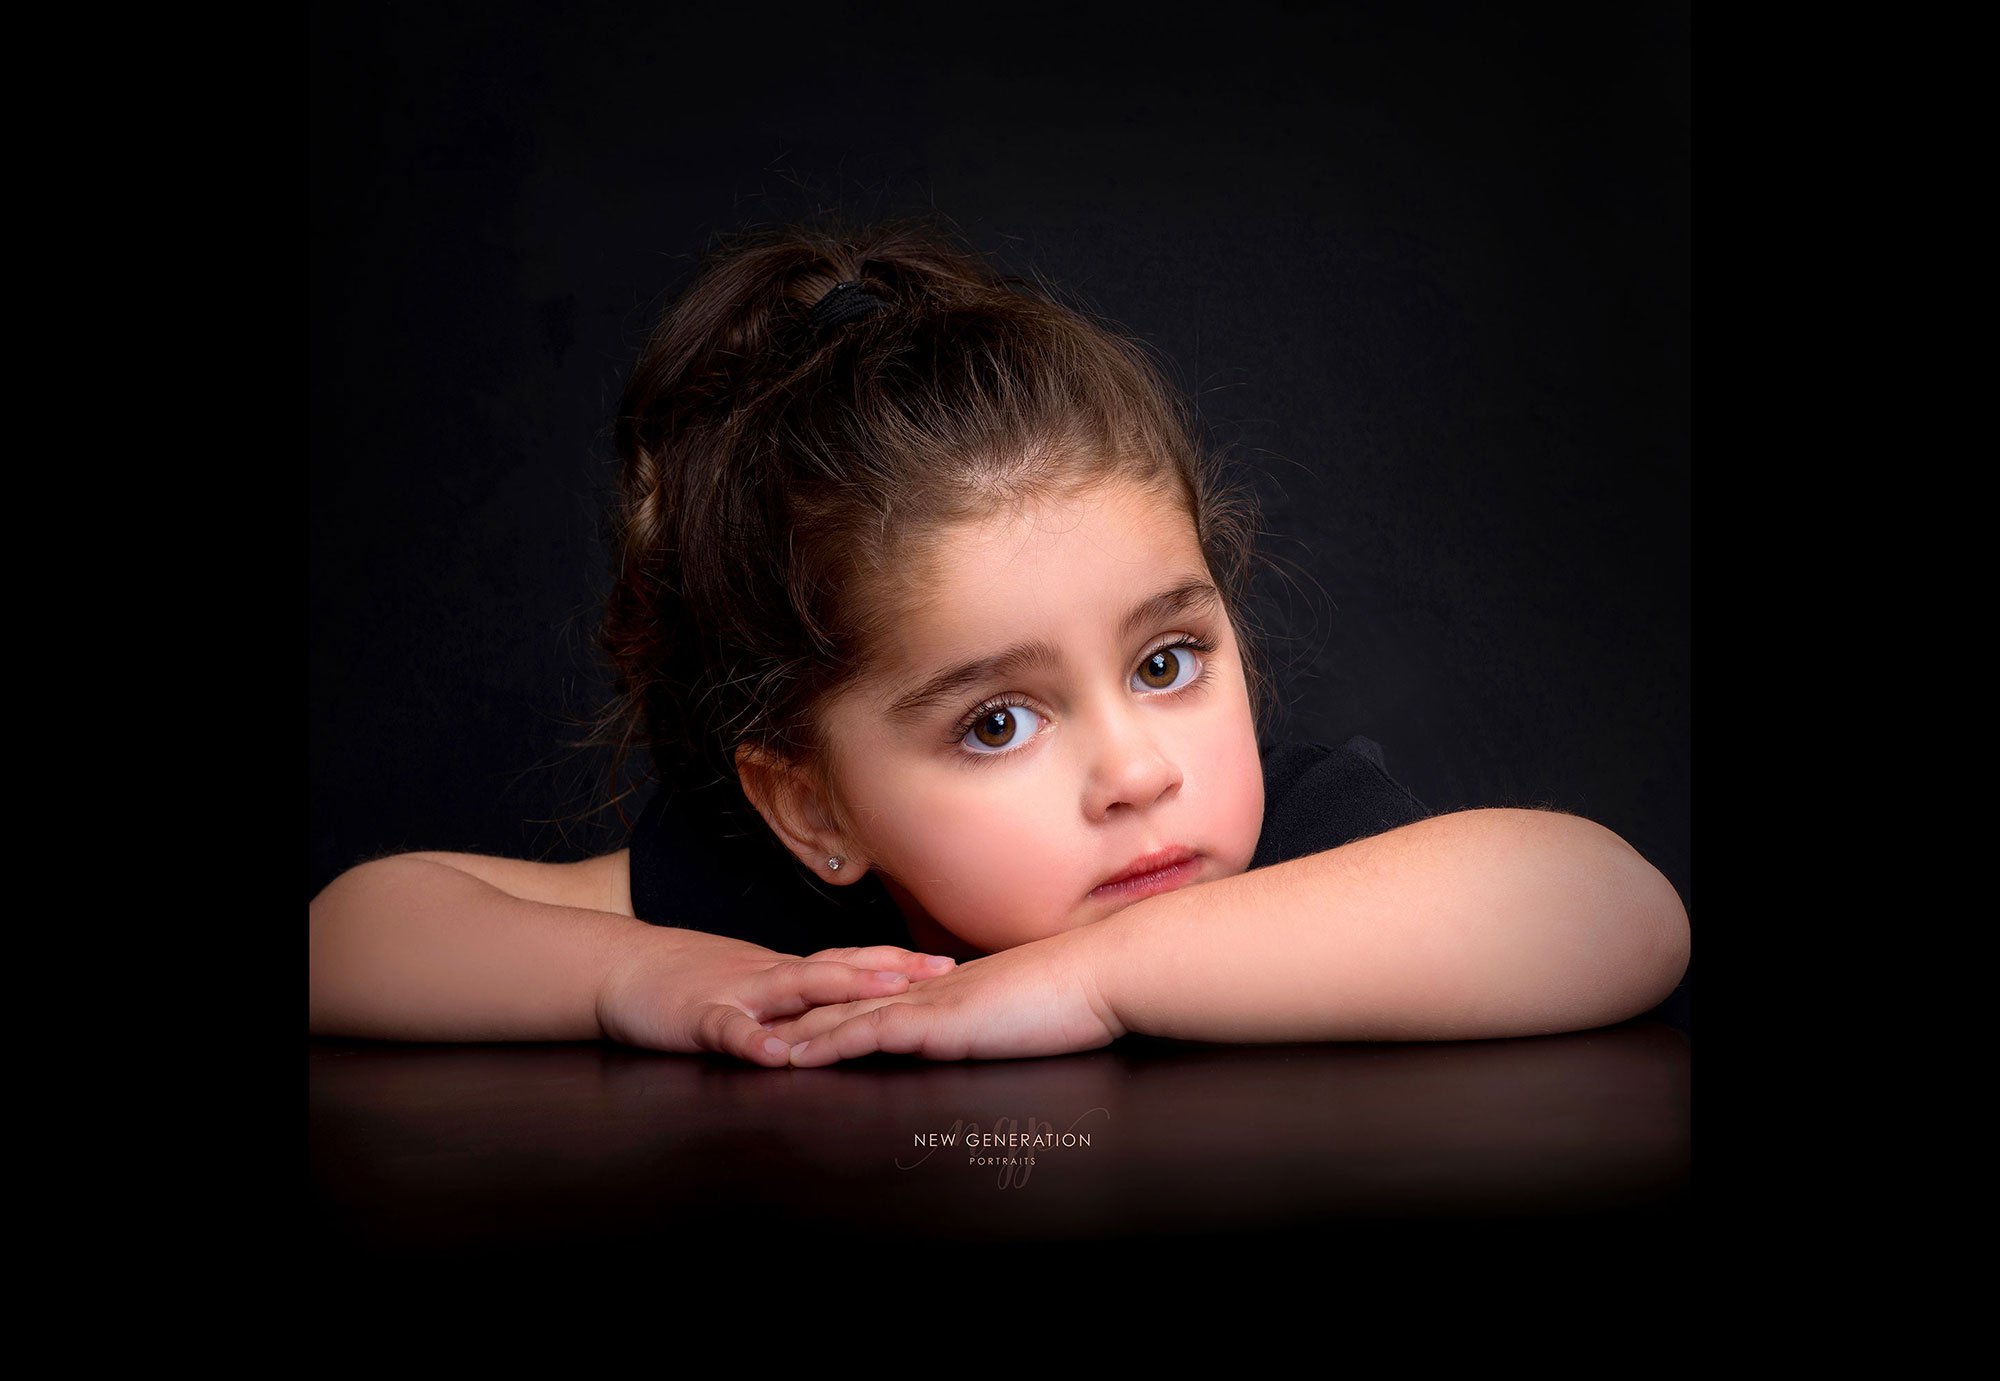 Child looking beautiful with large brown eyes captured by New Generation Portraits